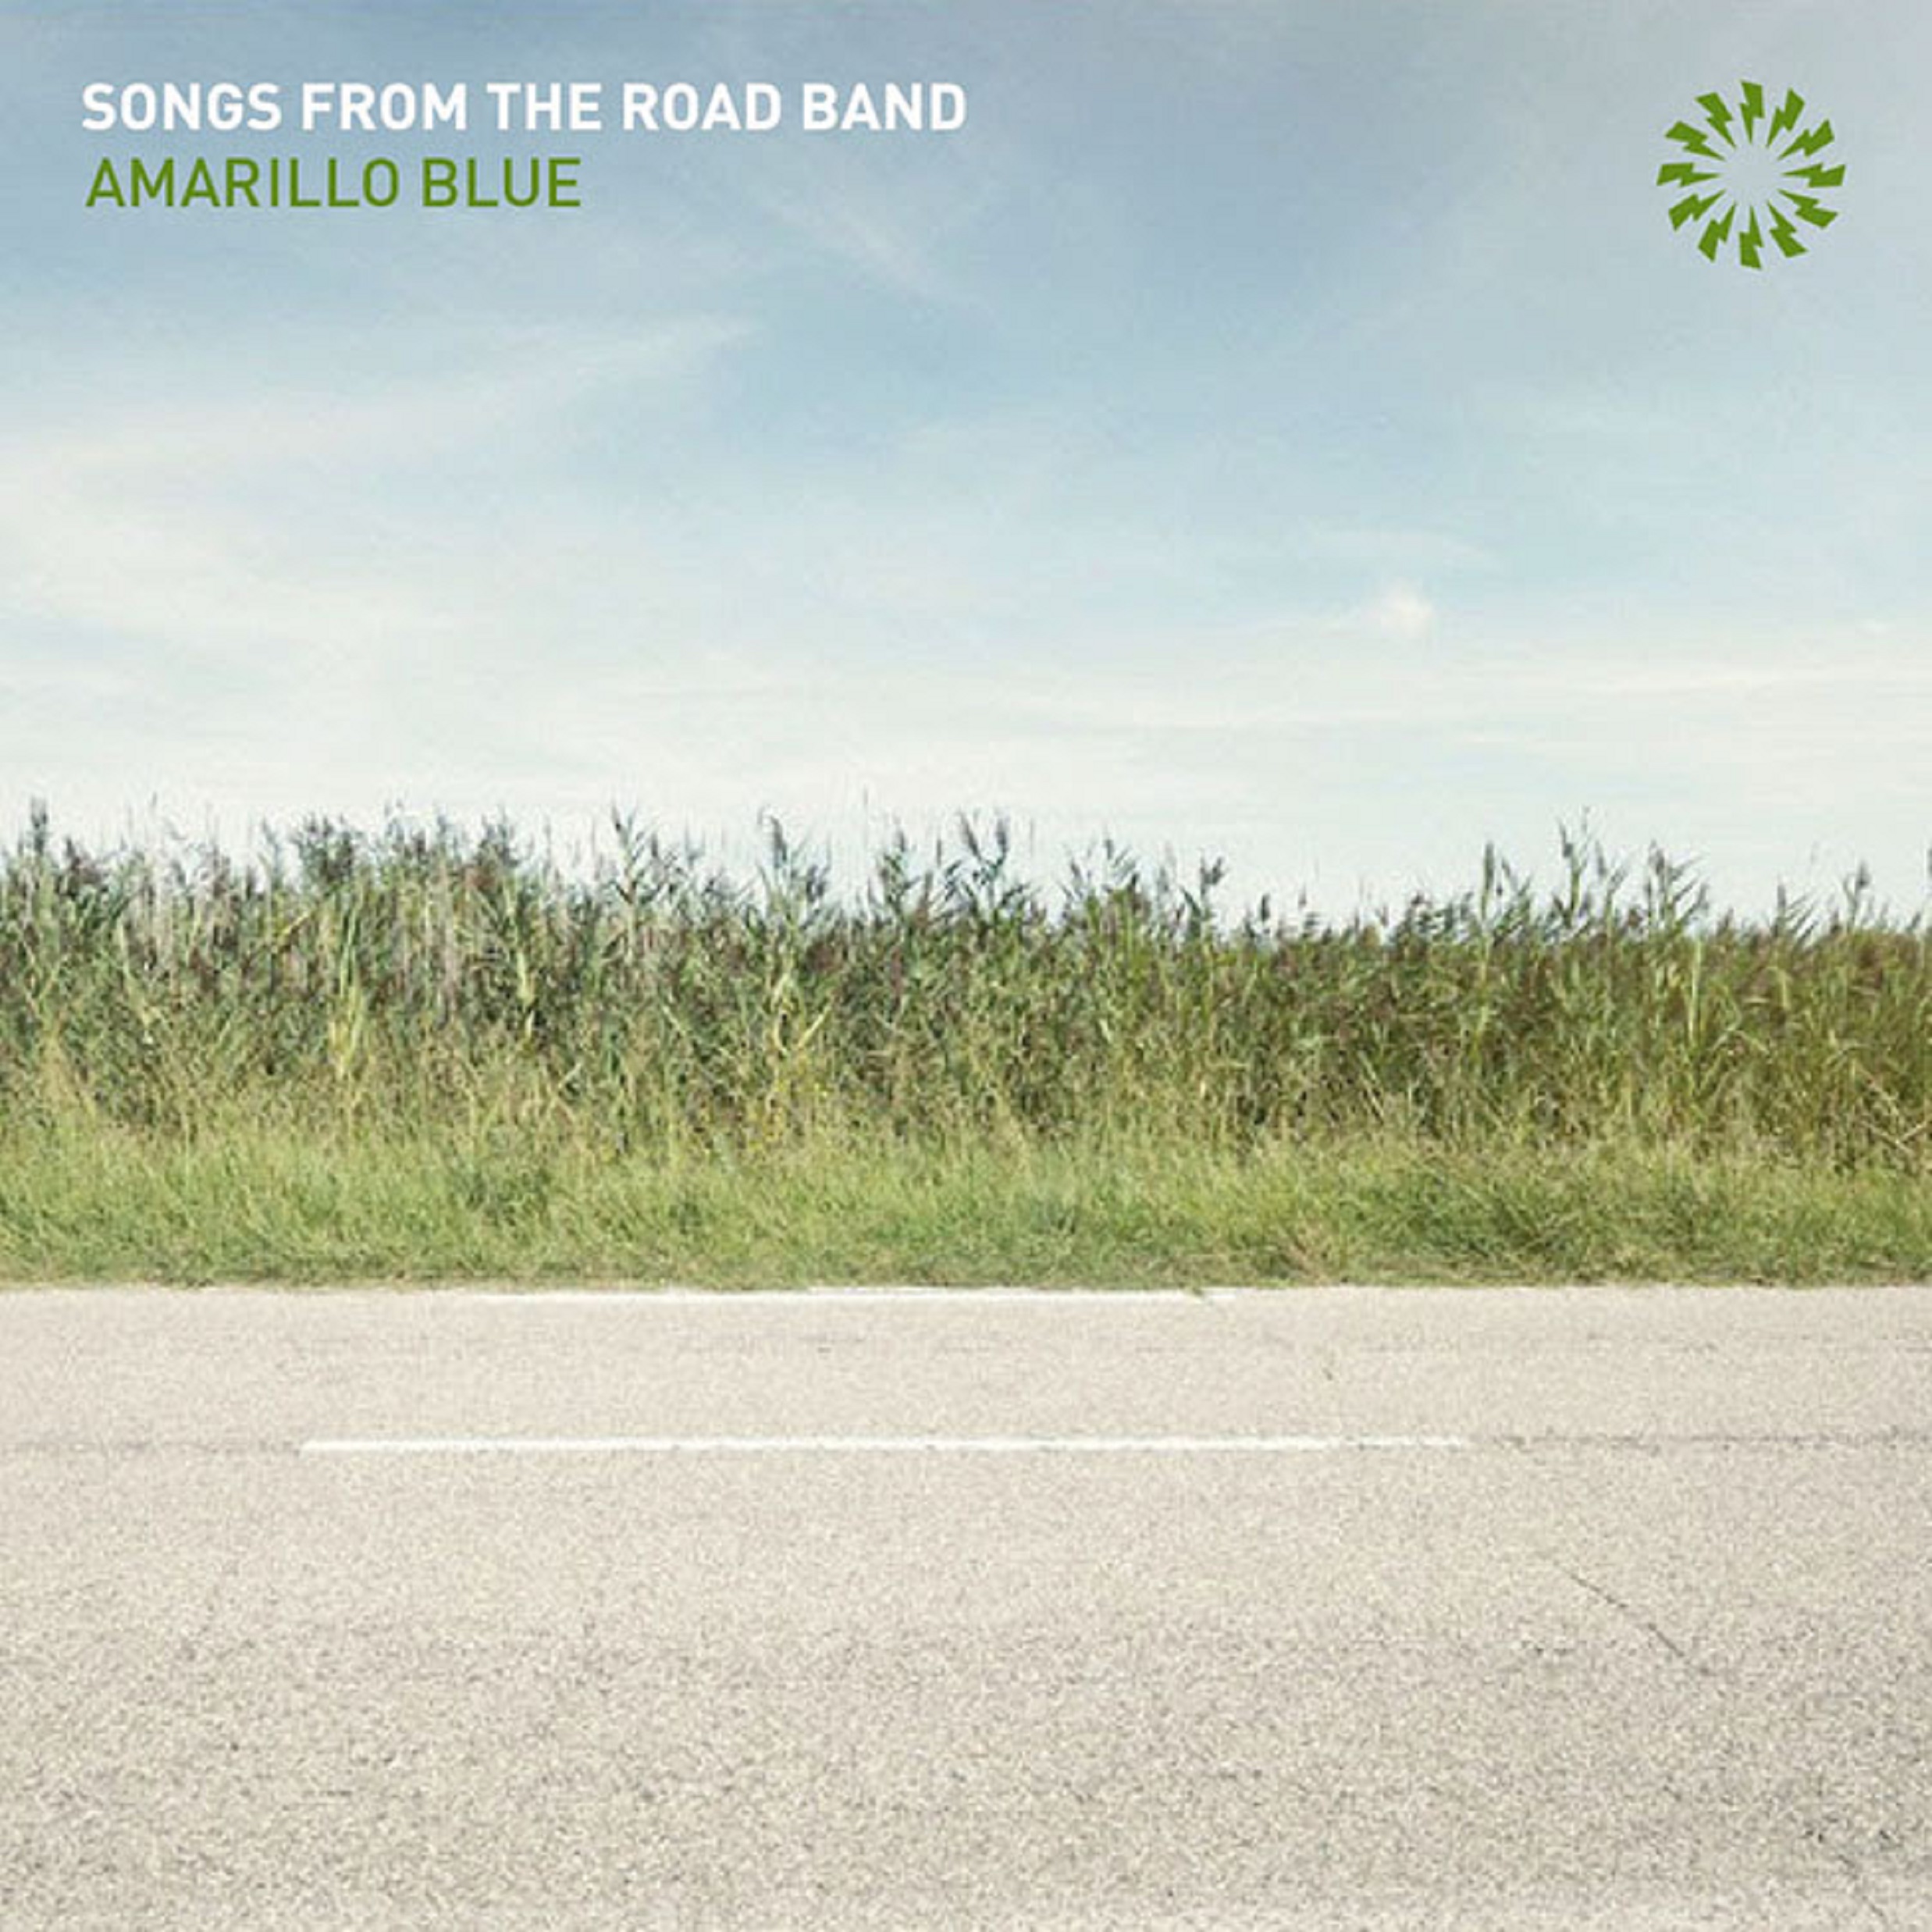 Songs From the Road Band Releases “Amarillo Blue”